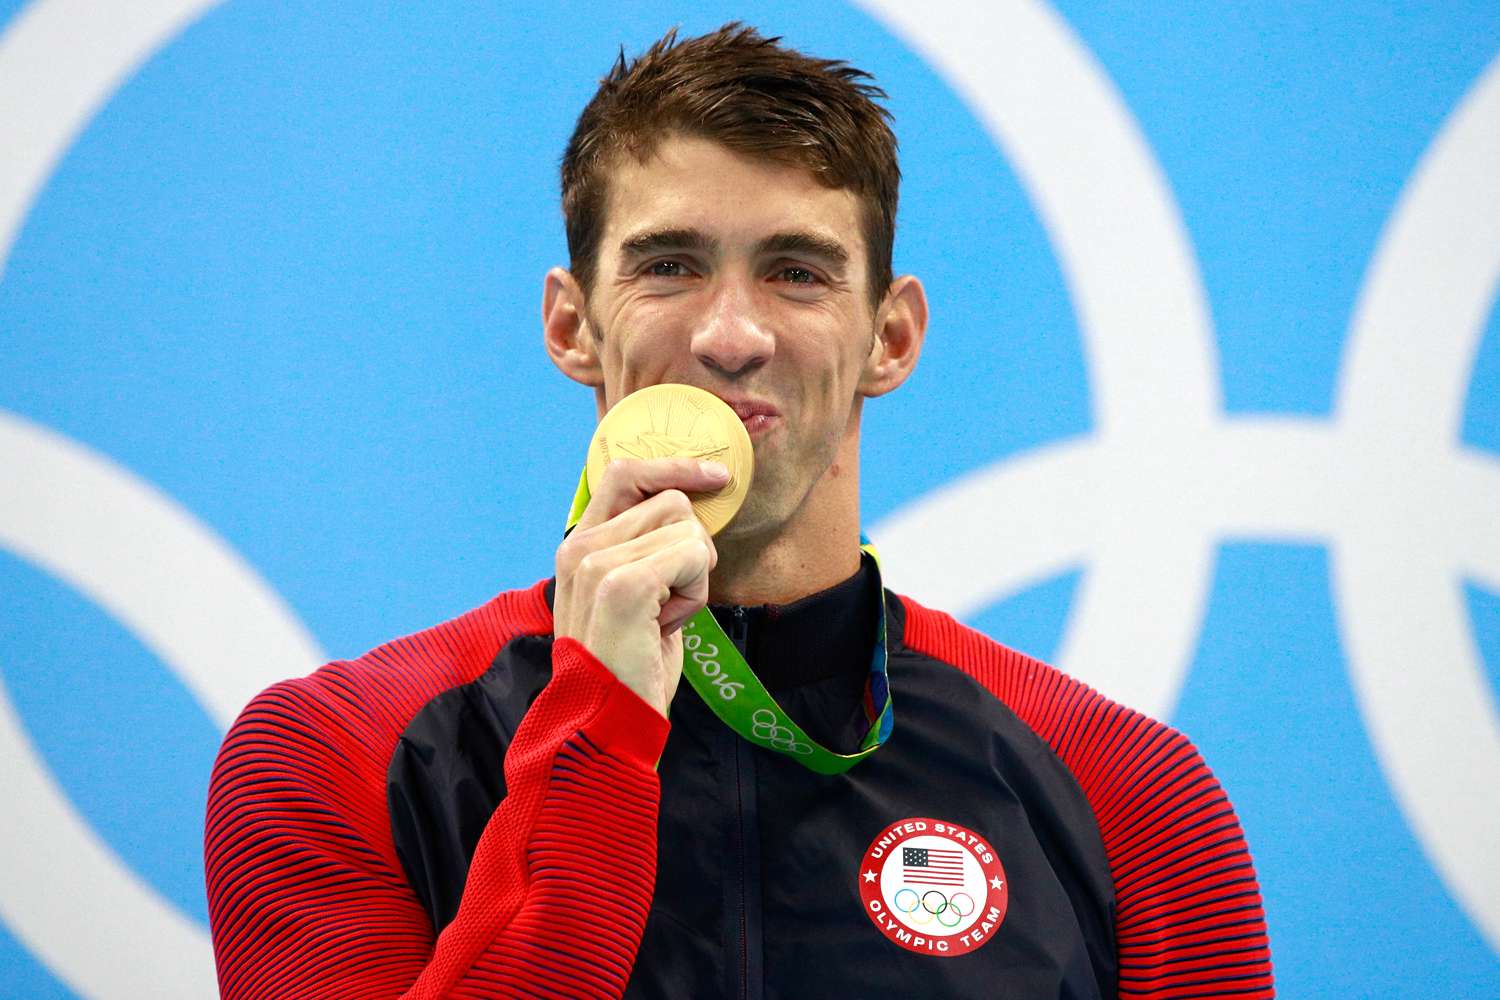 How many Olympic Games did Michael Phelps compete in?